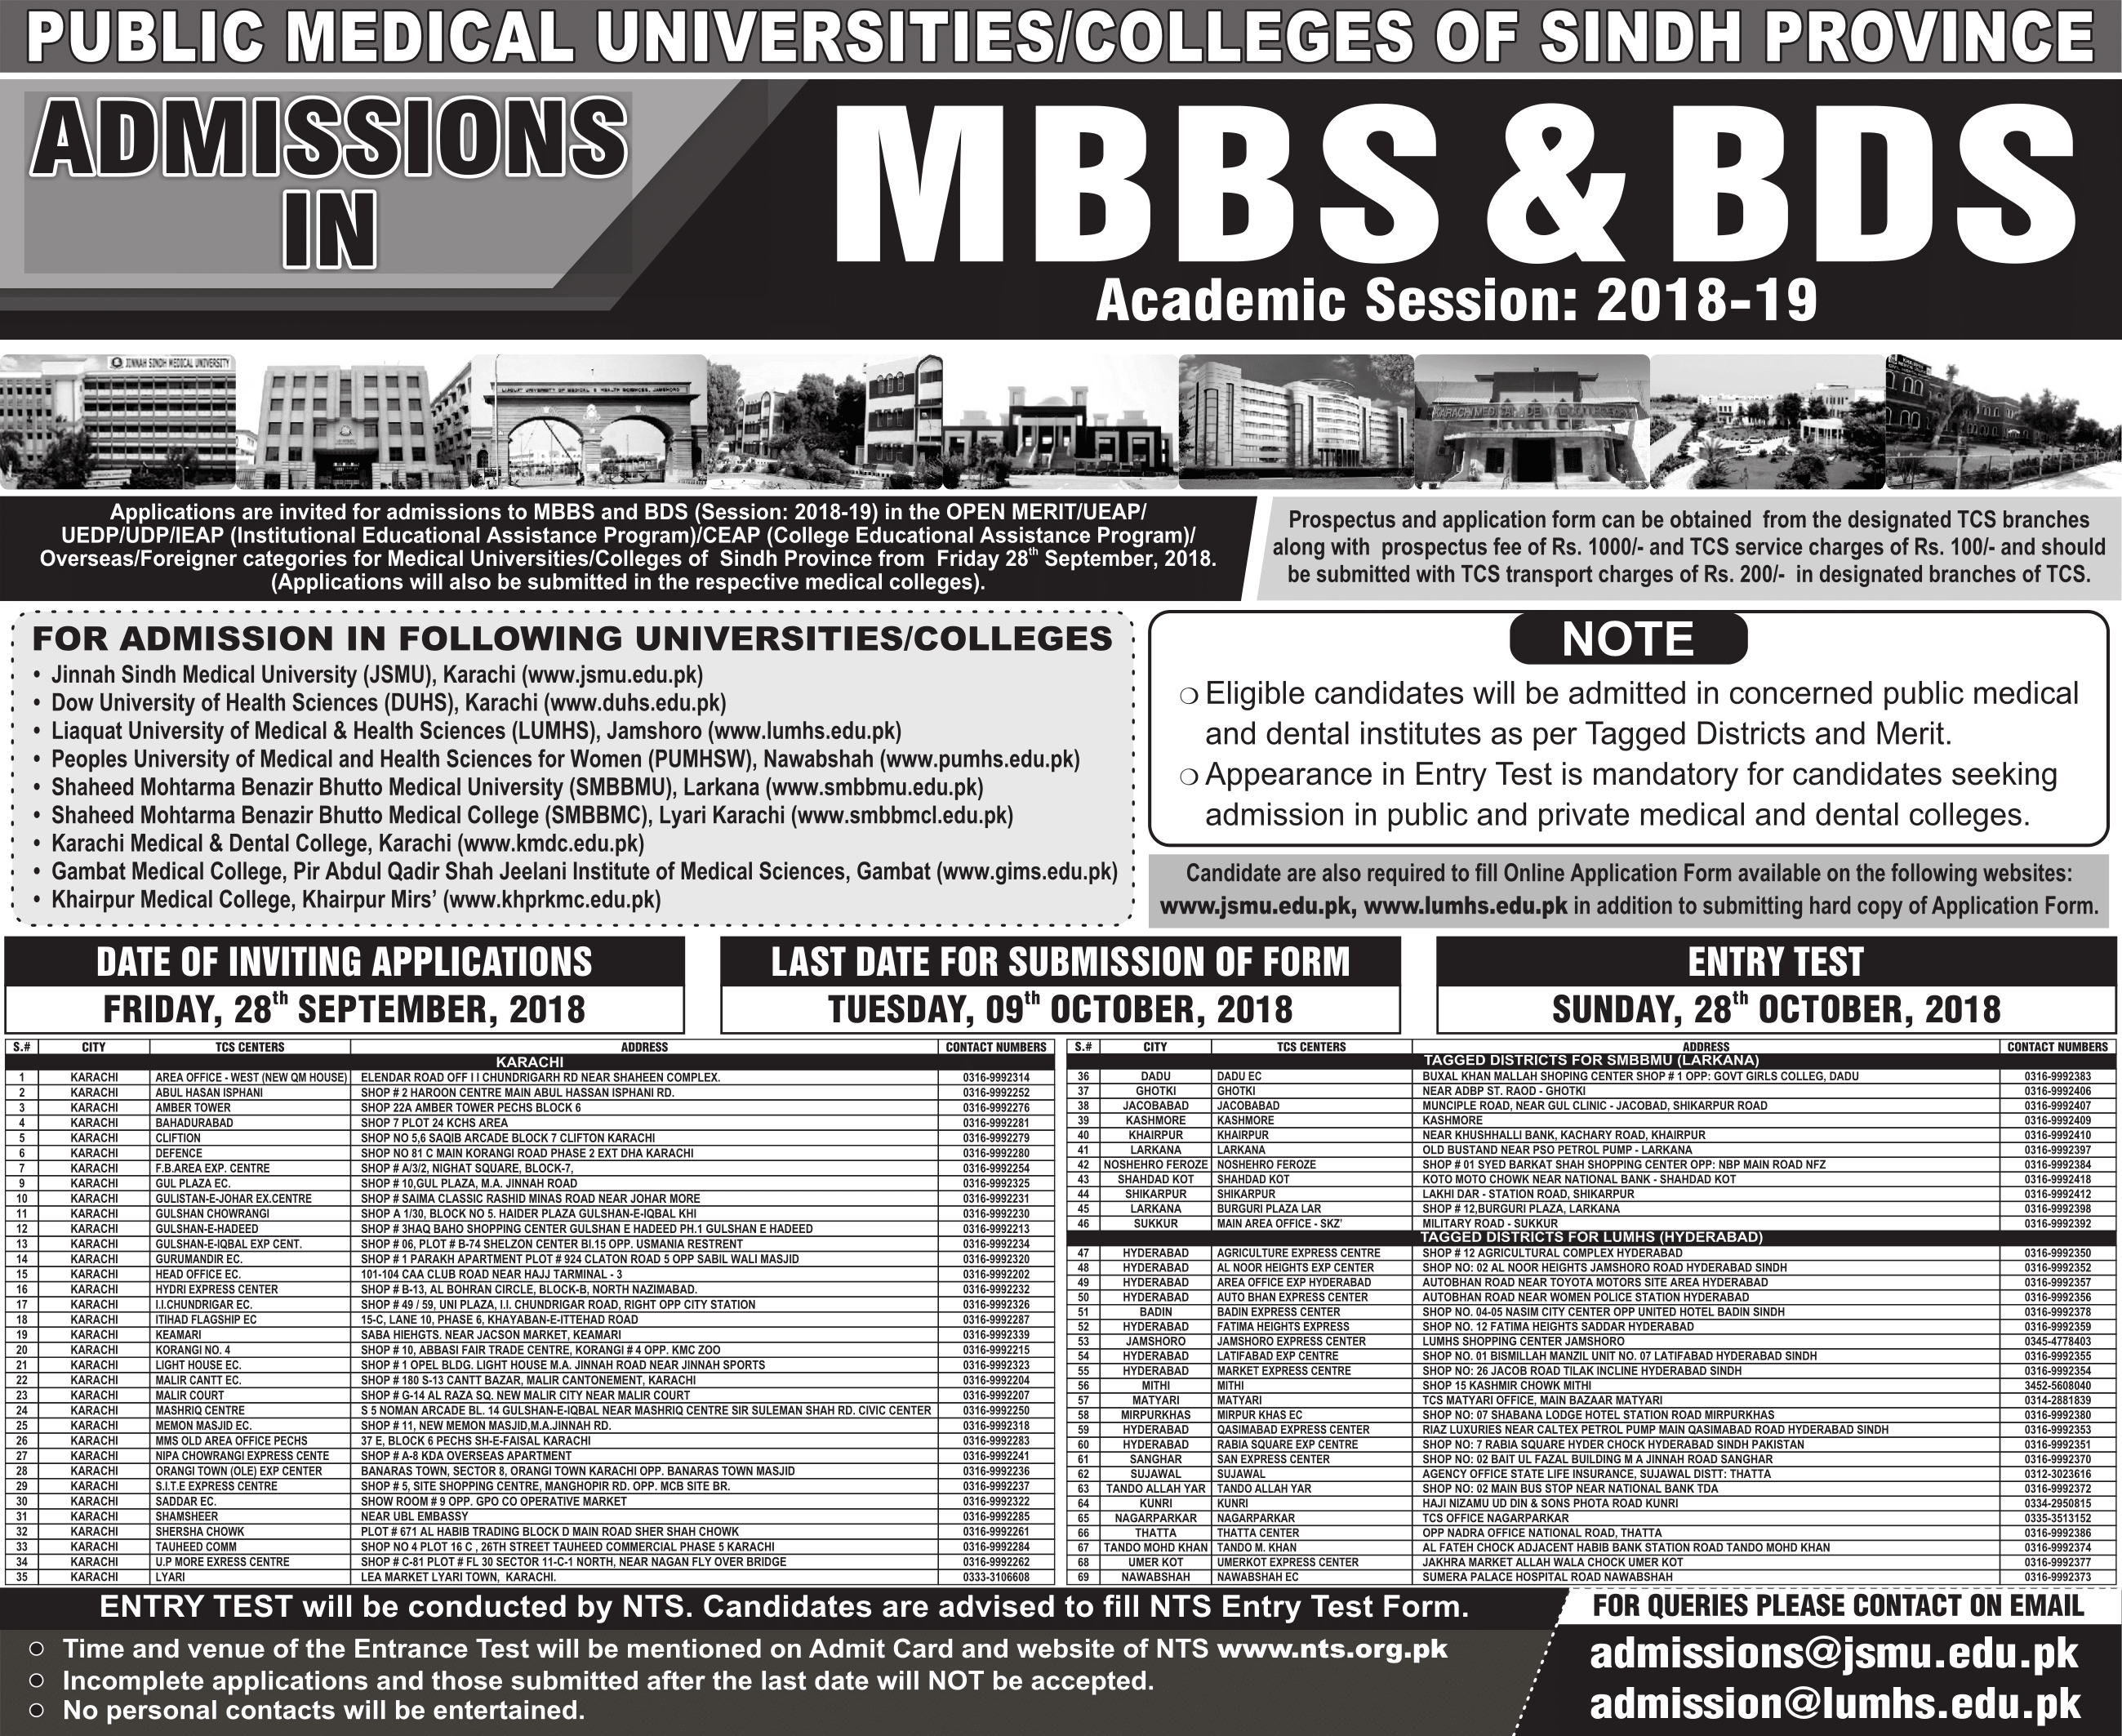 Sindh Medical Colleges Admissions 2018-19 (MBBS & BDS)